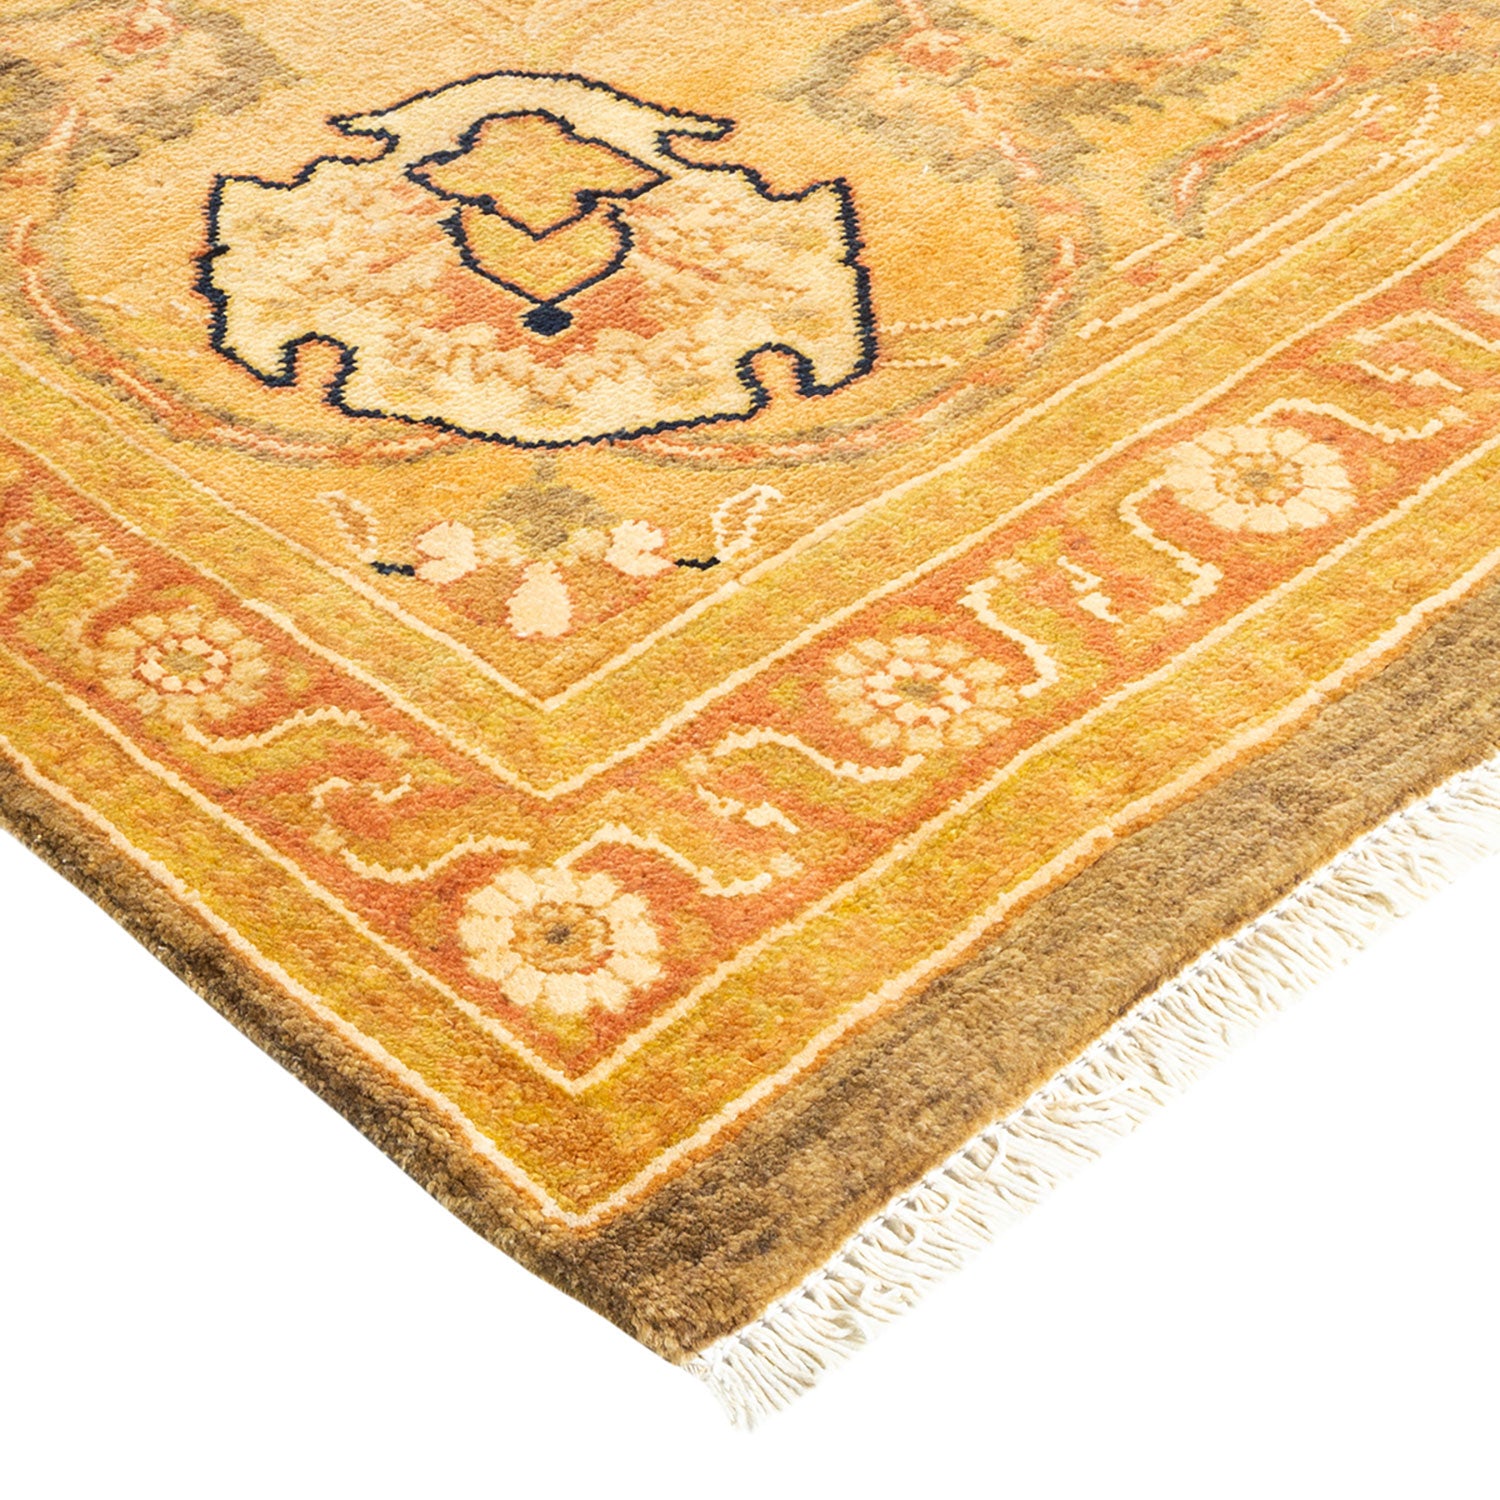 Exquisite oriental rug showcases intricate patterns and warm earthy tones.